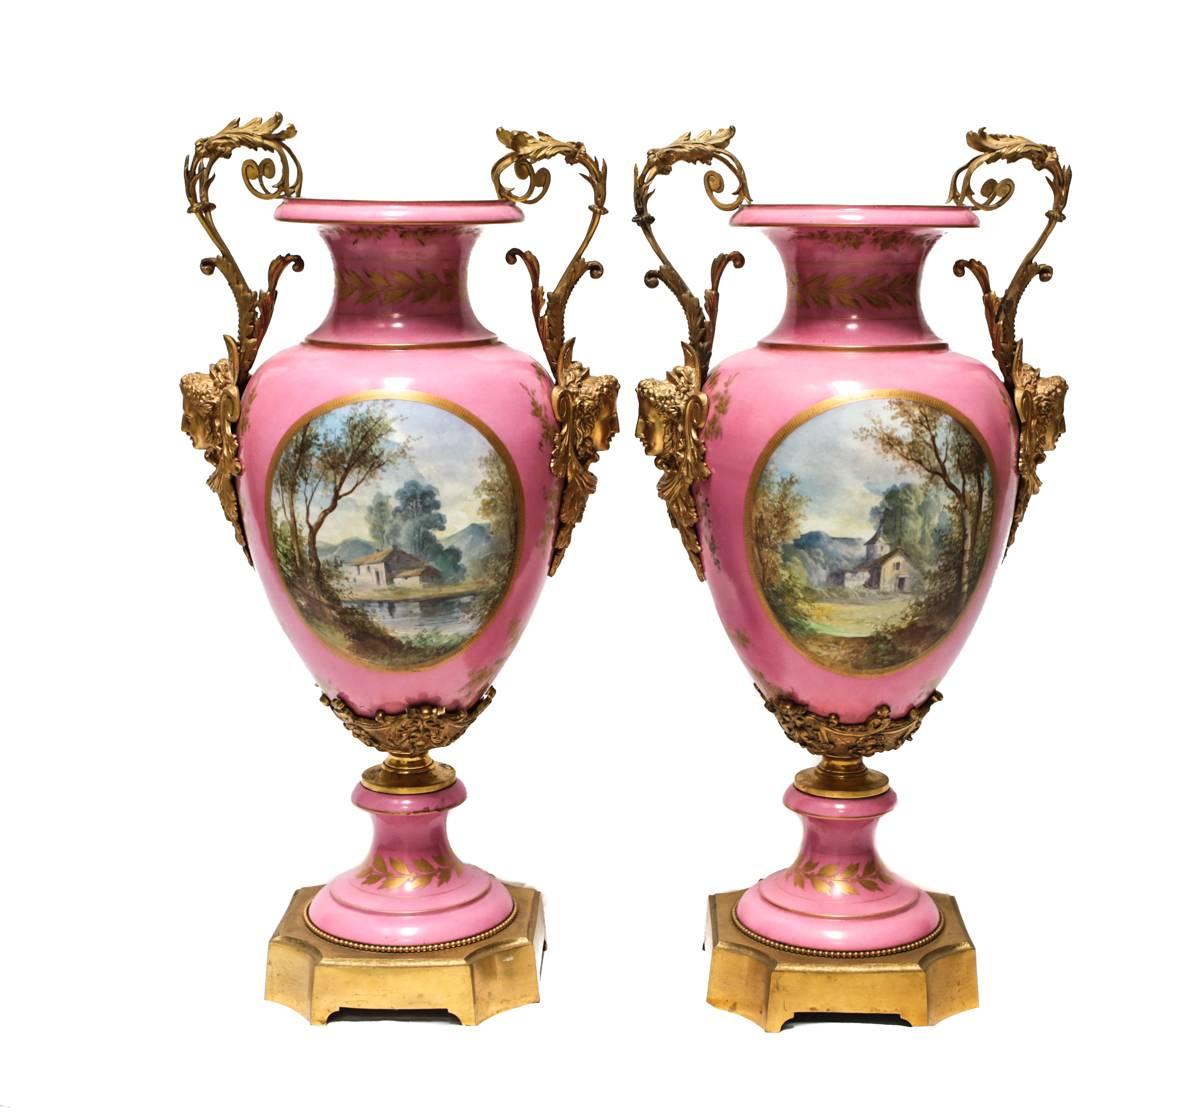 An imposing pair of French hand-painted porcelain urns with gilt bronze mounts. The central reliefs depict hand-painted outdoor scenes after Fragonard, "Blindman's Bluff" and "The See-Saw". Each signed lower right 
A. Maglin.